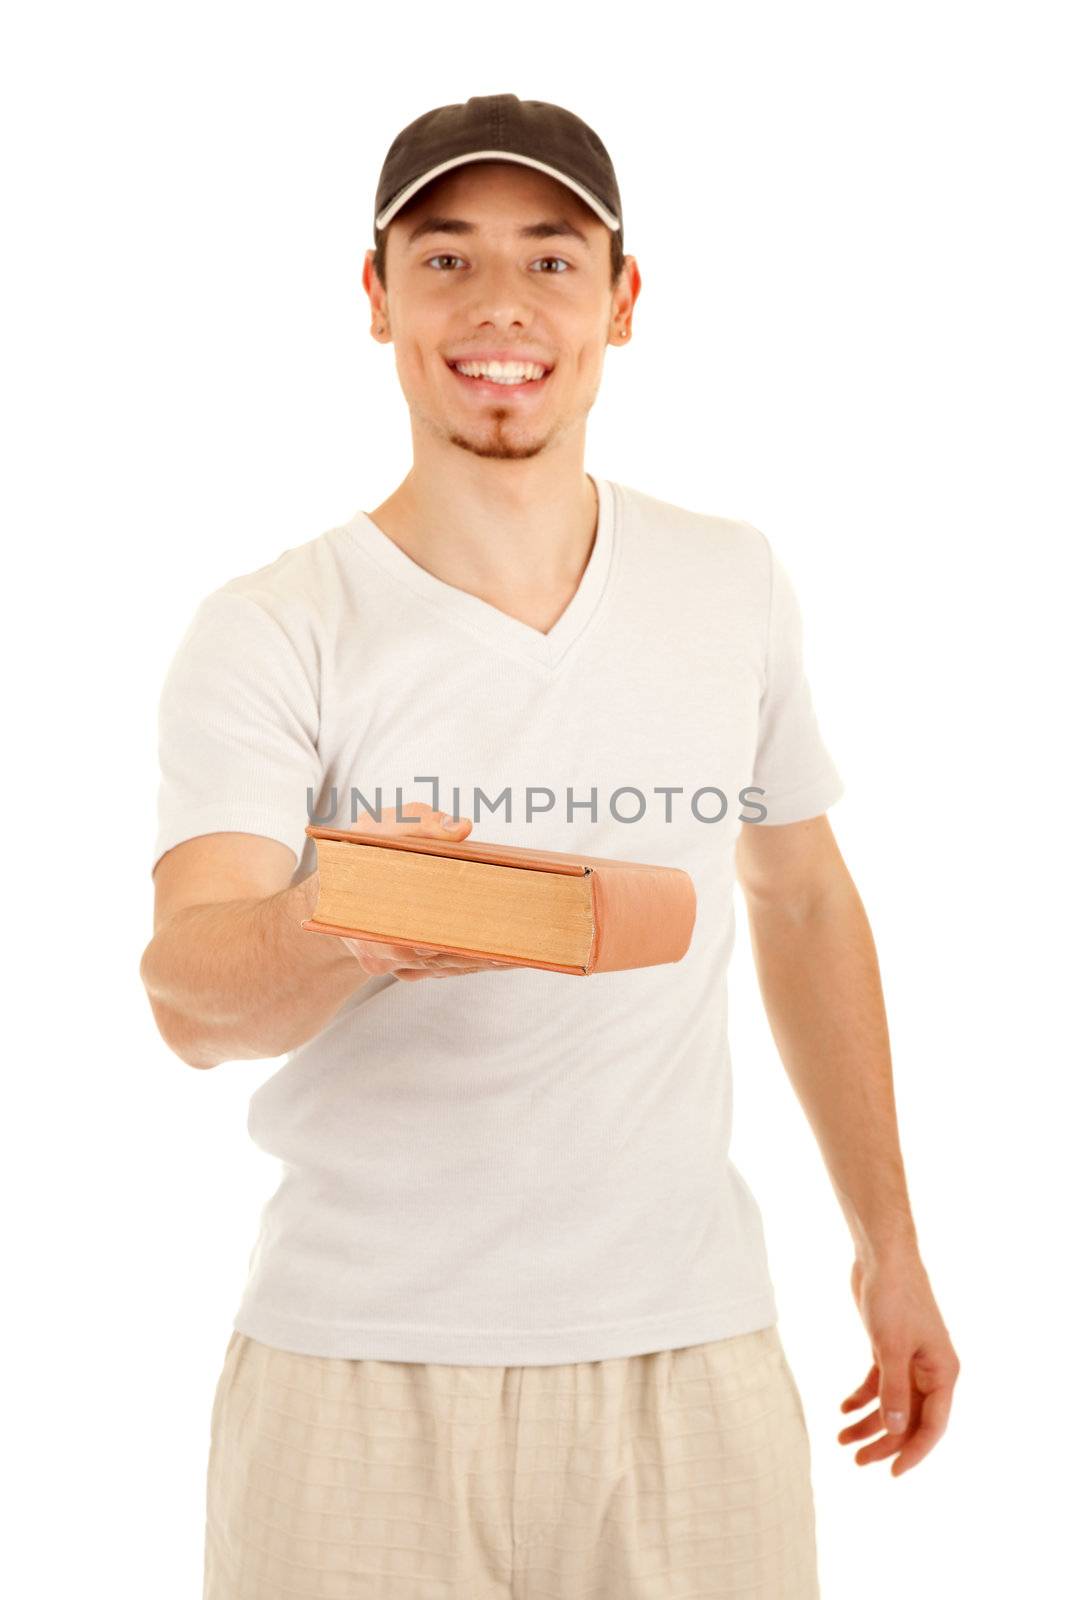 Smiling young casual men advices a book. On white background. Focus on the book